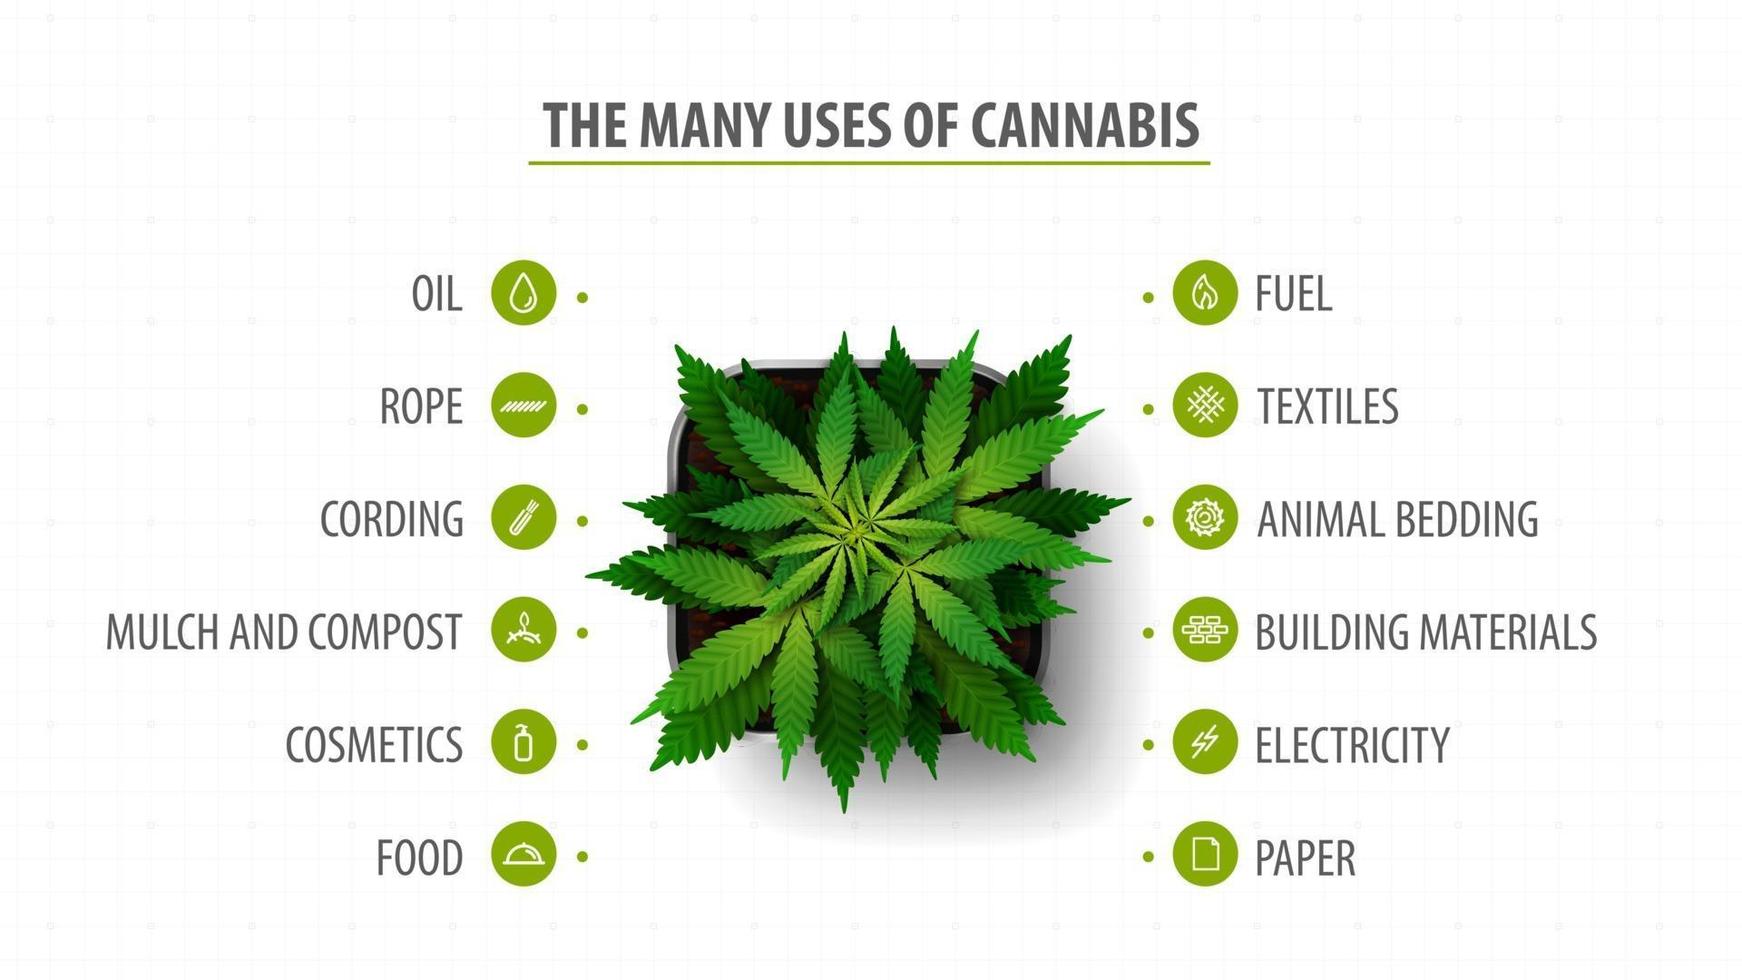 Many uses of cannabis, banner with infographic of uses of cannabis and greenbush of cannabis plant, top view vector